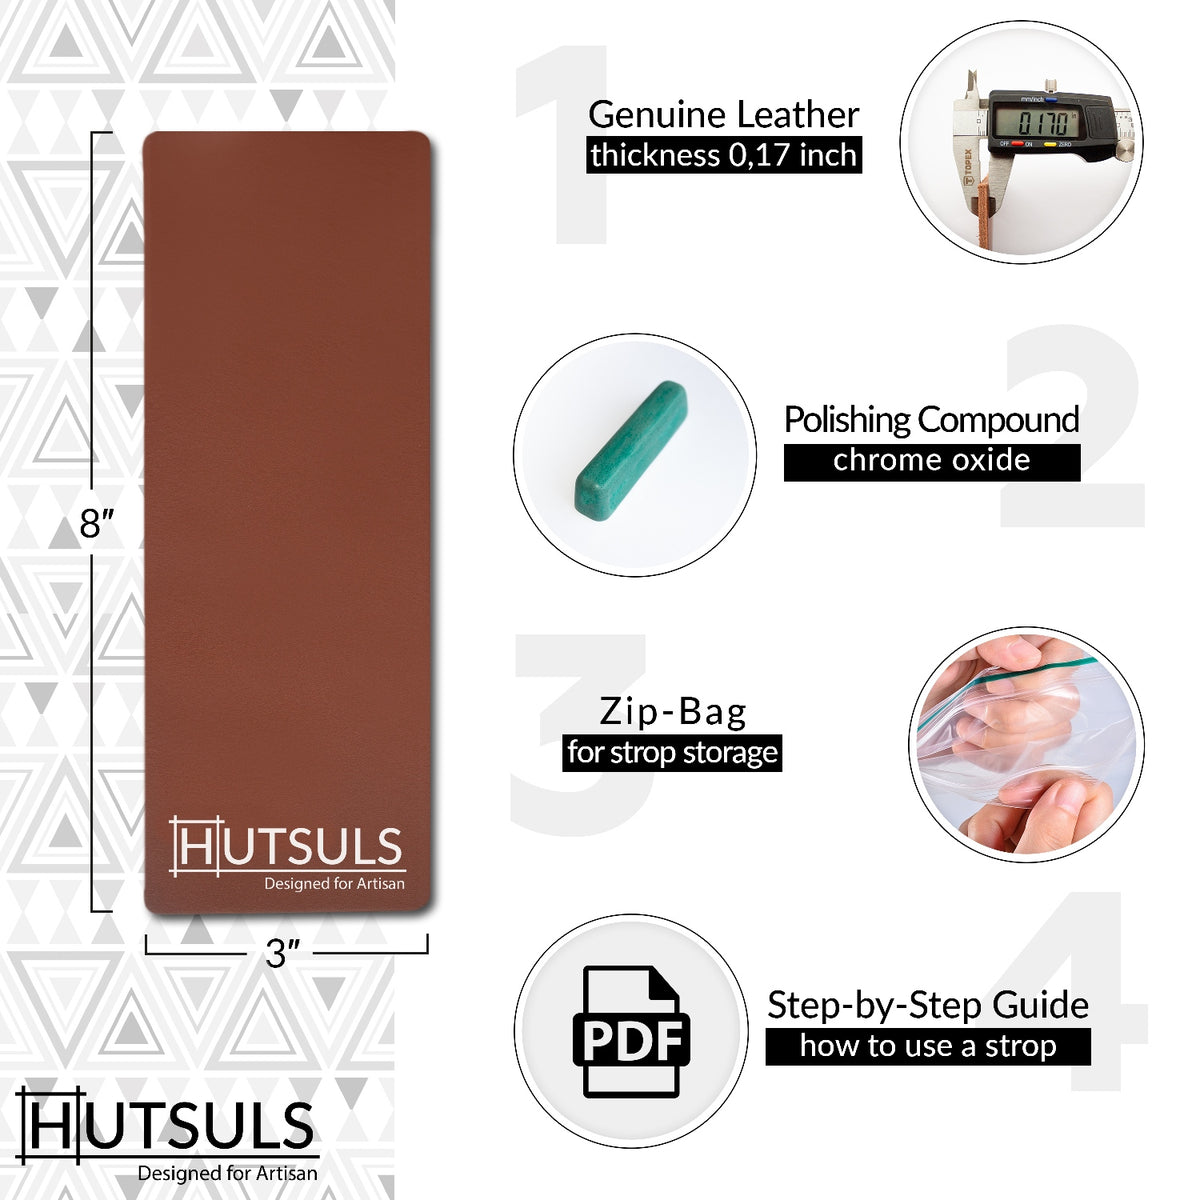 Hutsuls Leather Strop Block with Compound - Get Razor-Sharp Edges with  Knife Strop Kit Easy to Use Quality Non-Slip Leather Stropping Block &  Leather Honing Strop Step-by-Step Guide Included